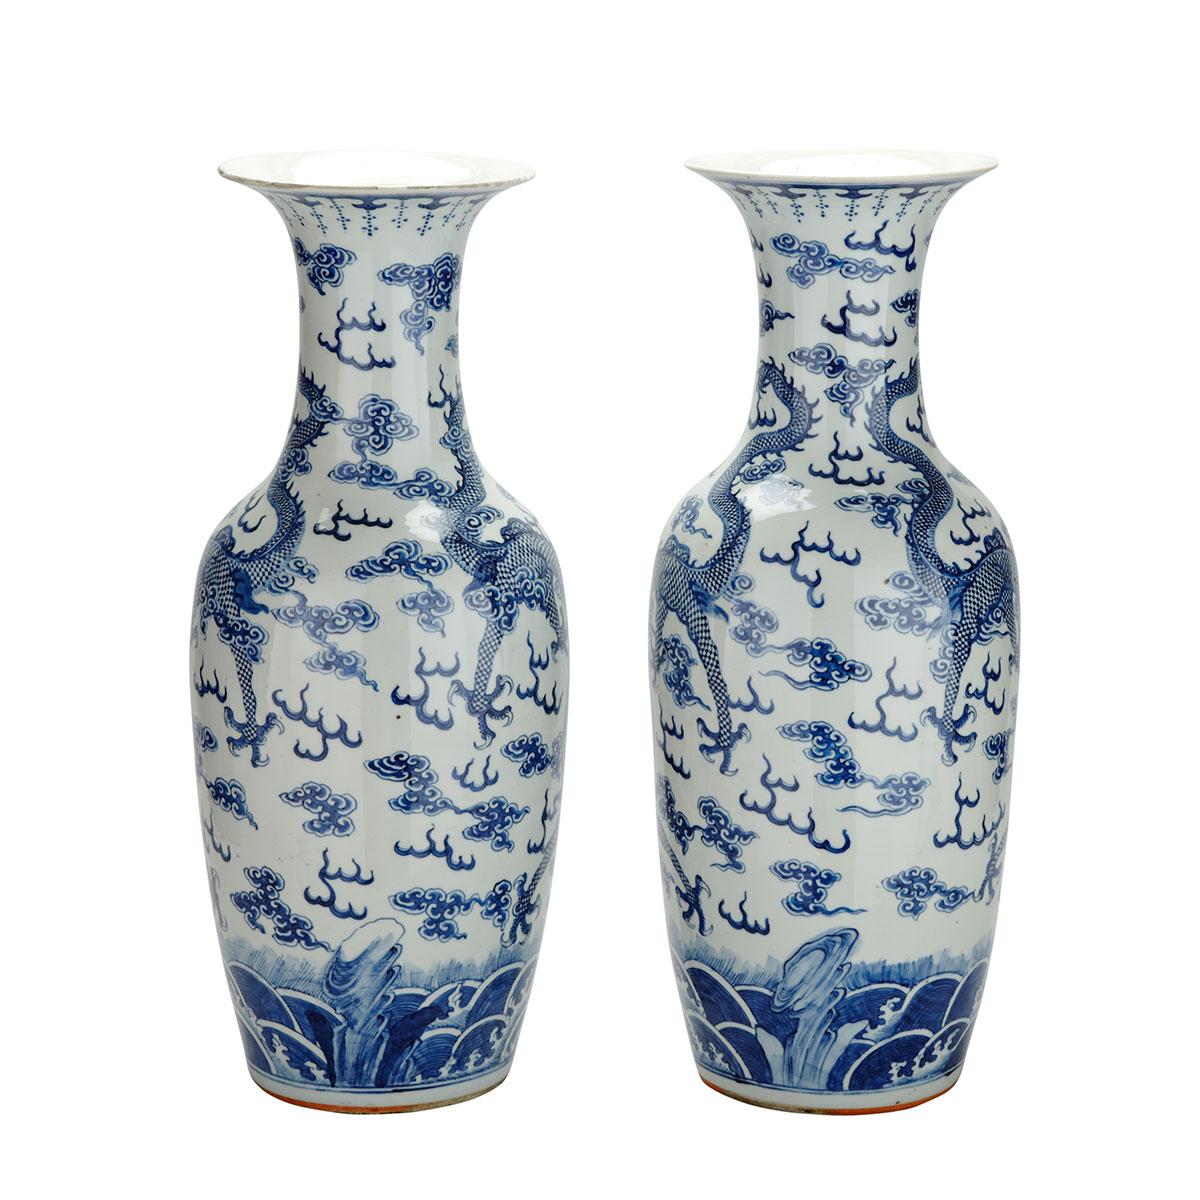 Pair of Large Blue and White Dragon Vases, 19th Century